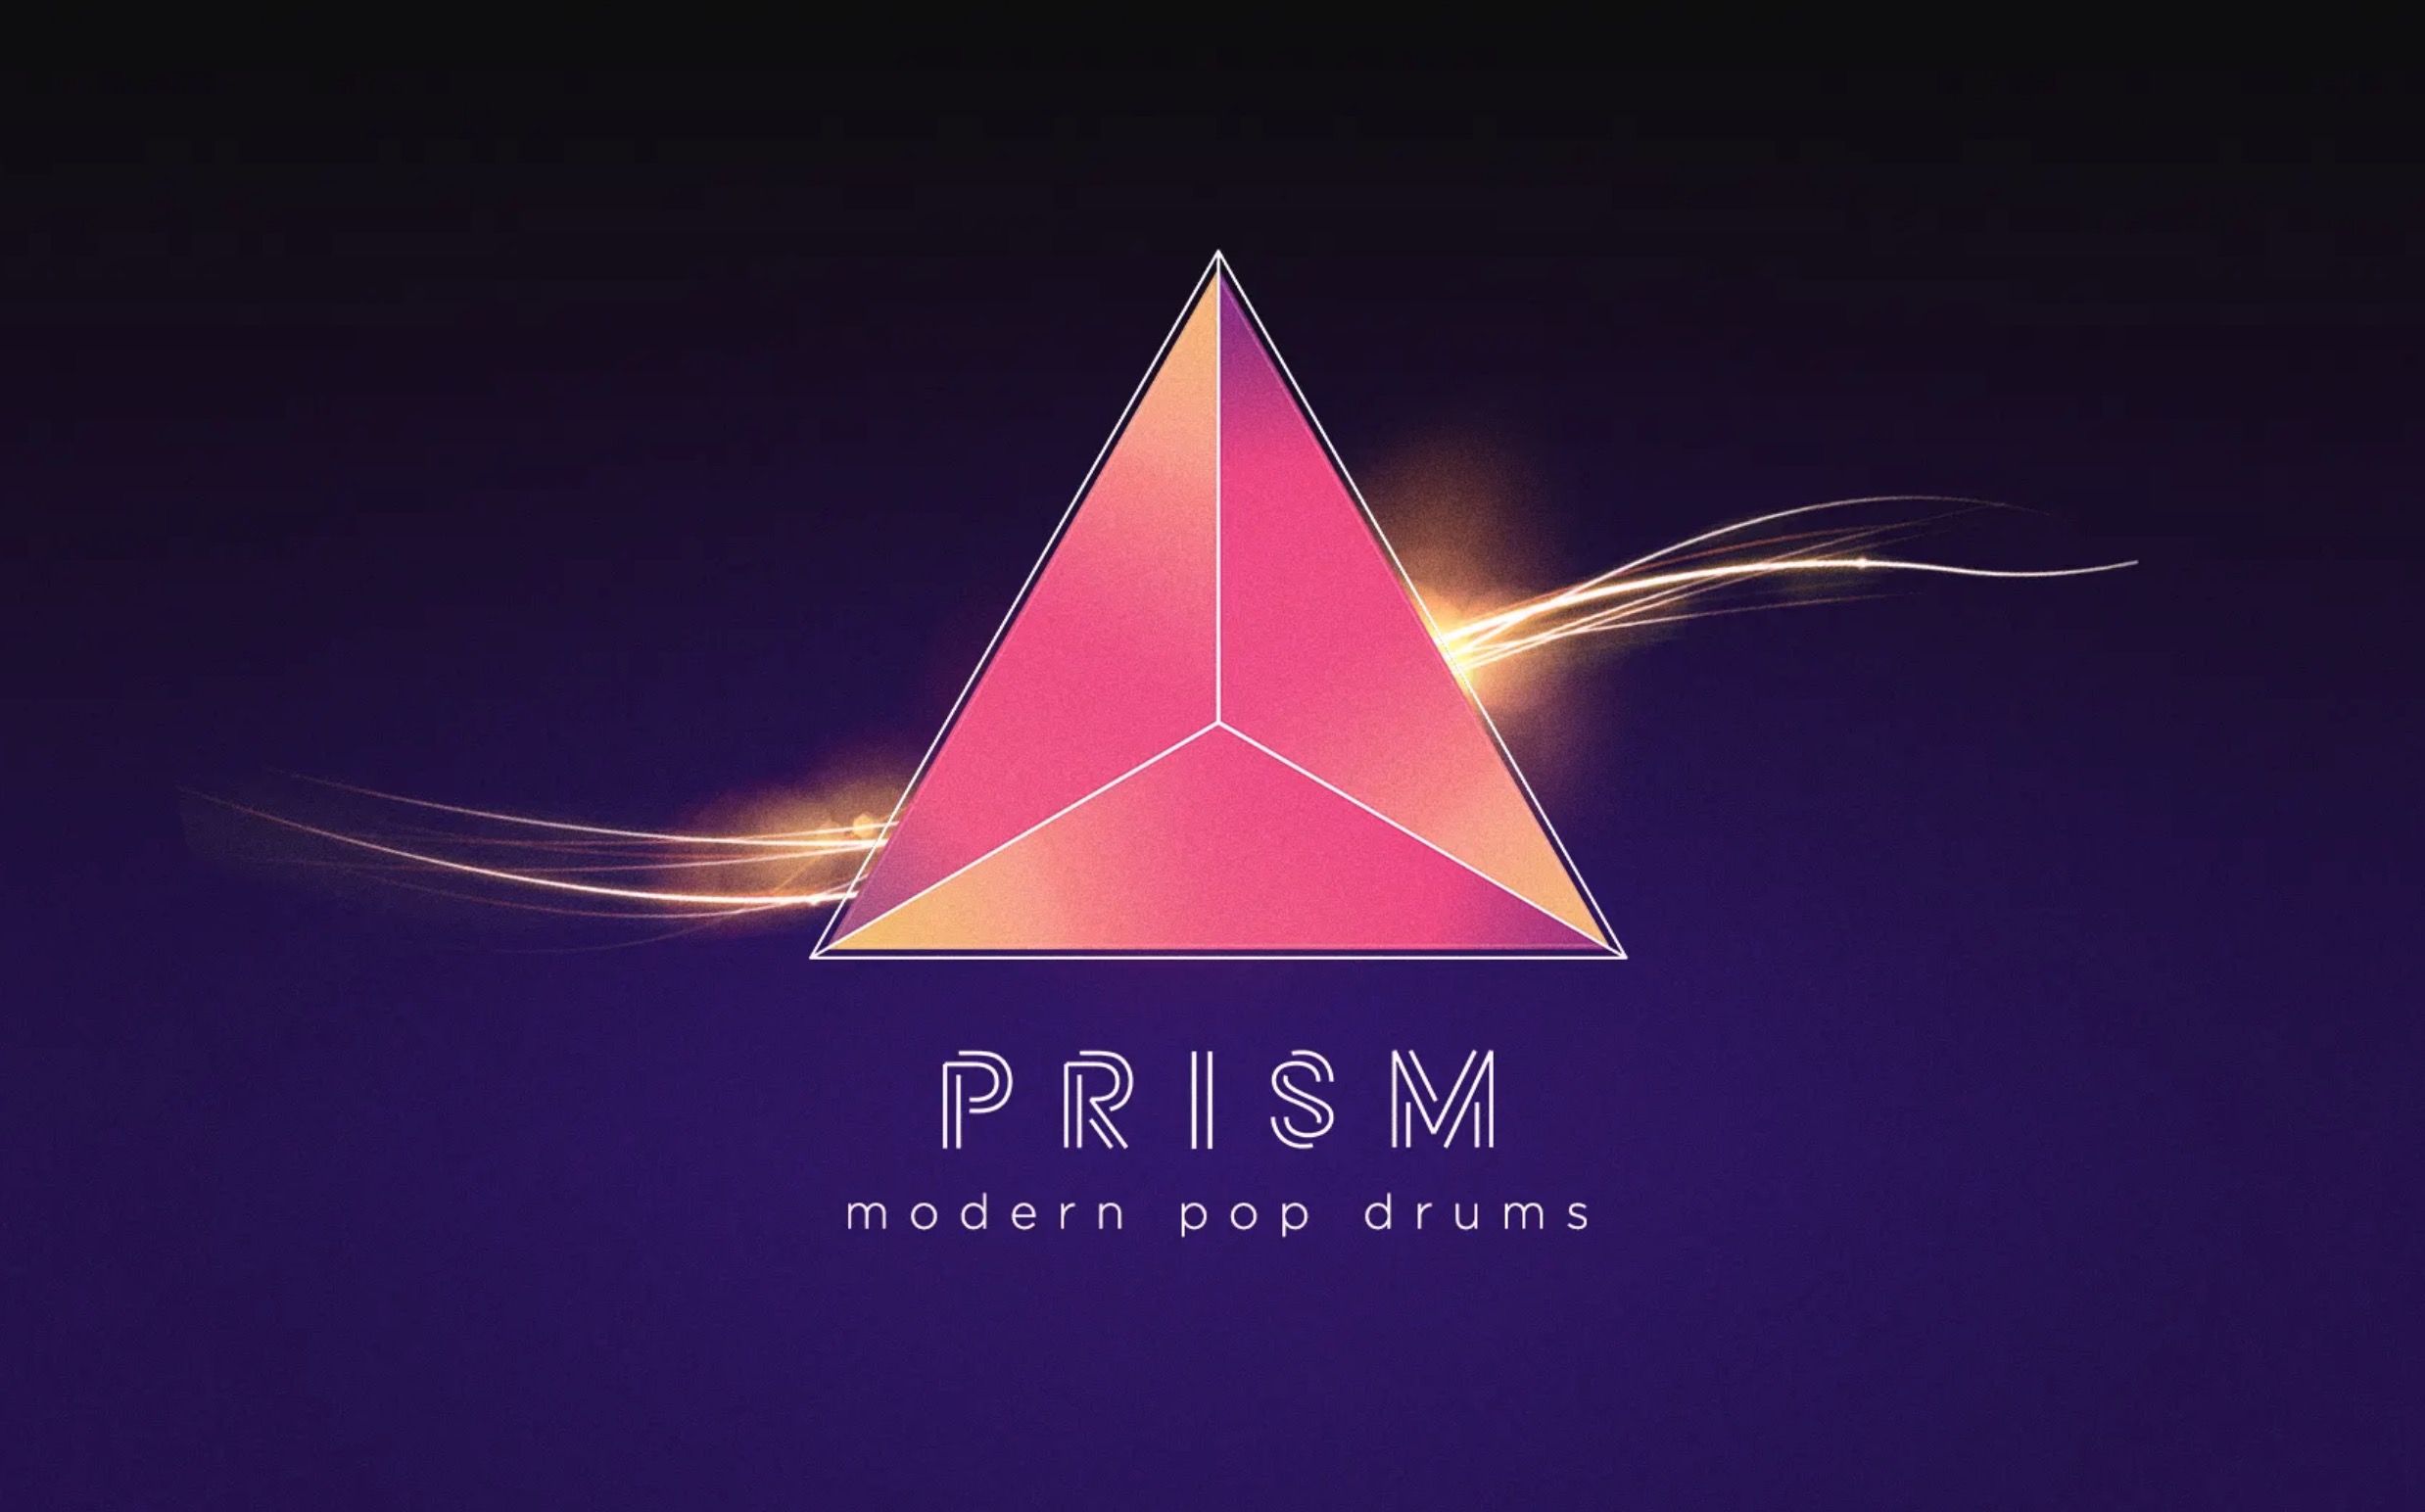 PRISM Review – Modern Pop Drums by AVA MUSIC GROUP